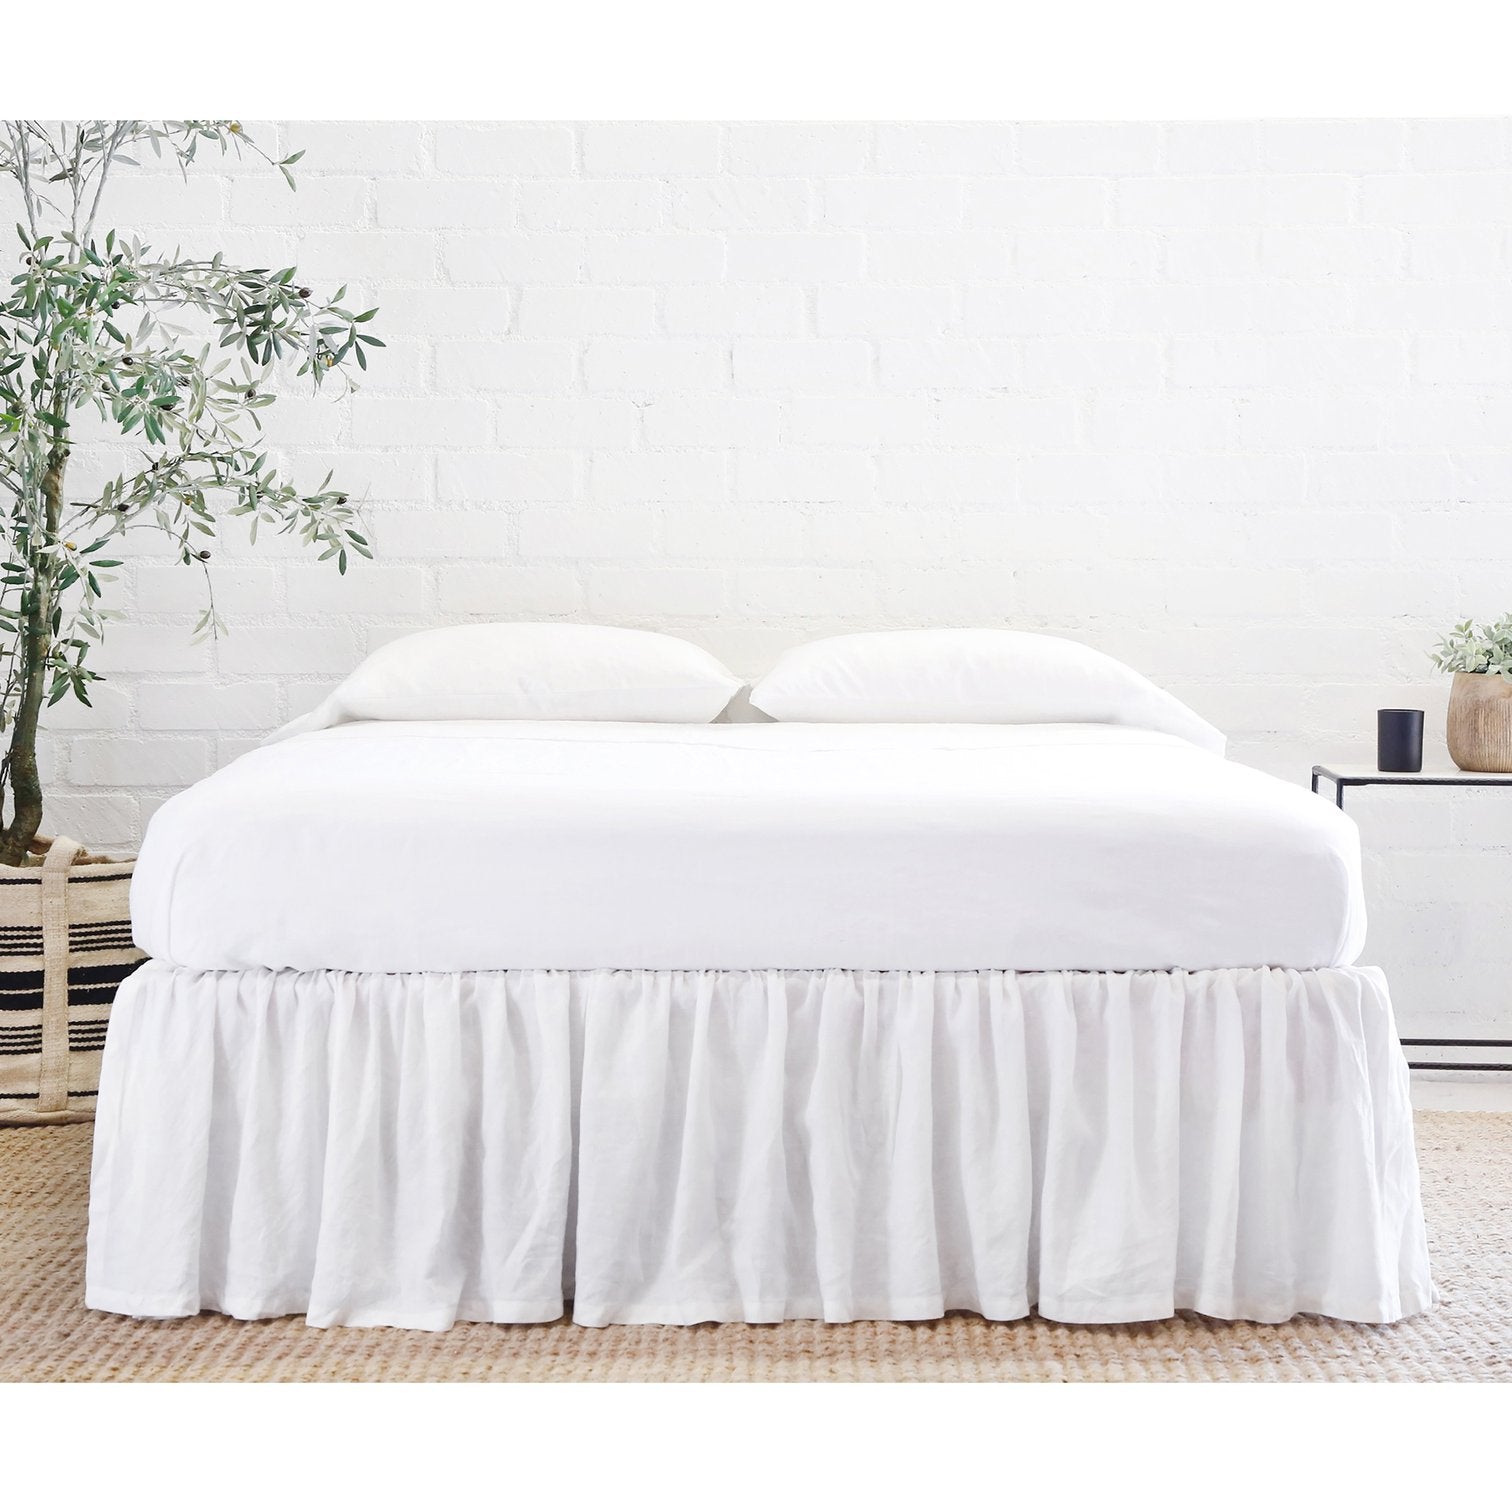 bed shown with white linen gathered bedskirt